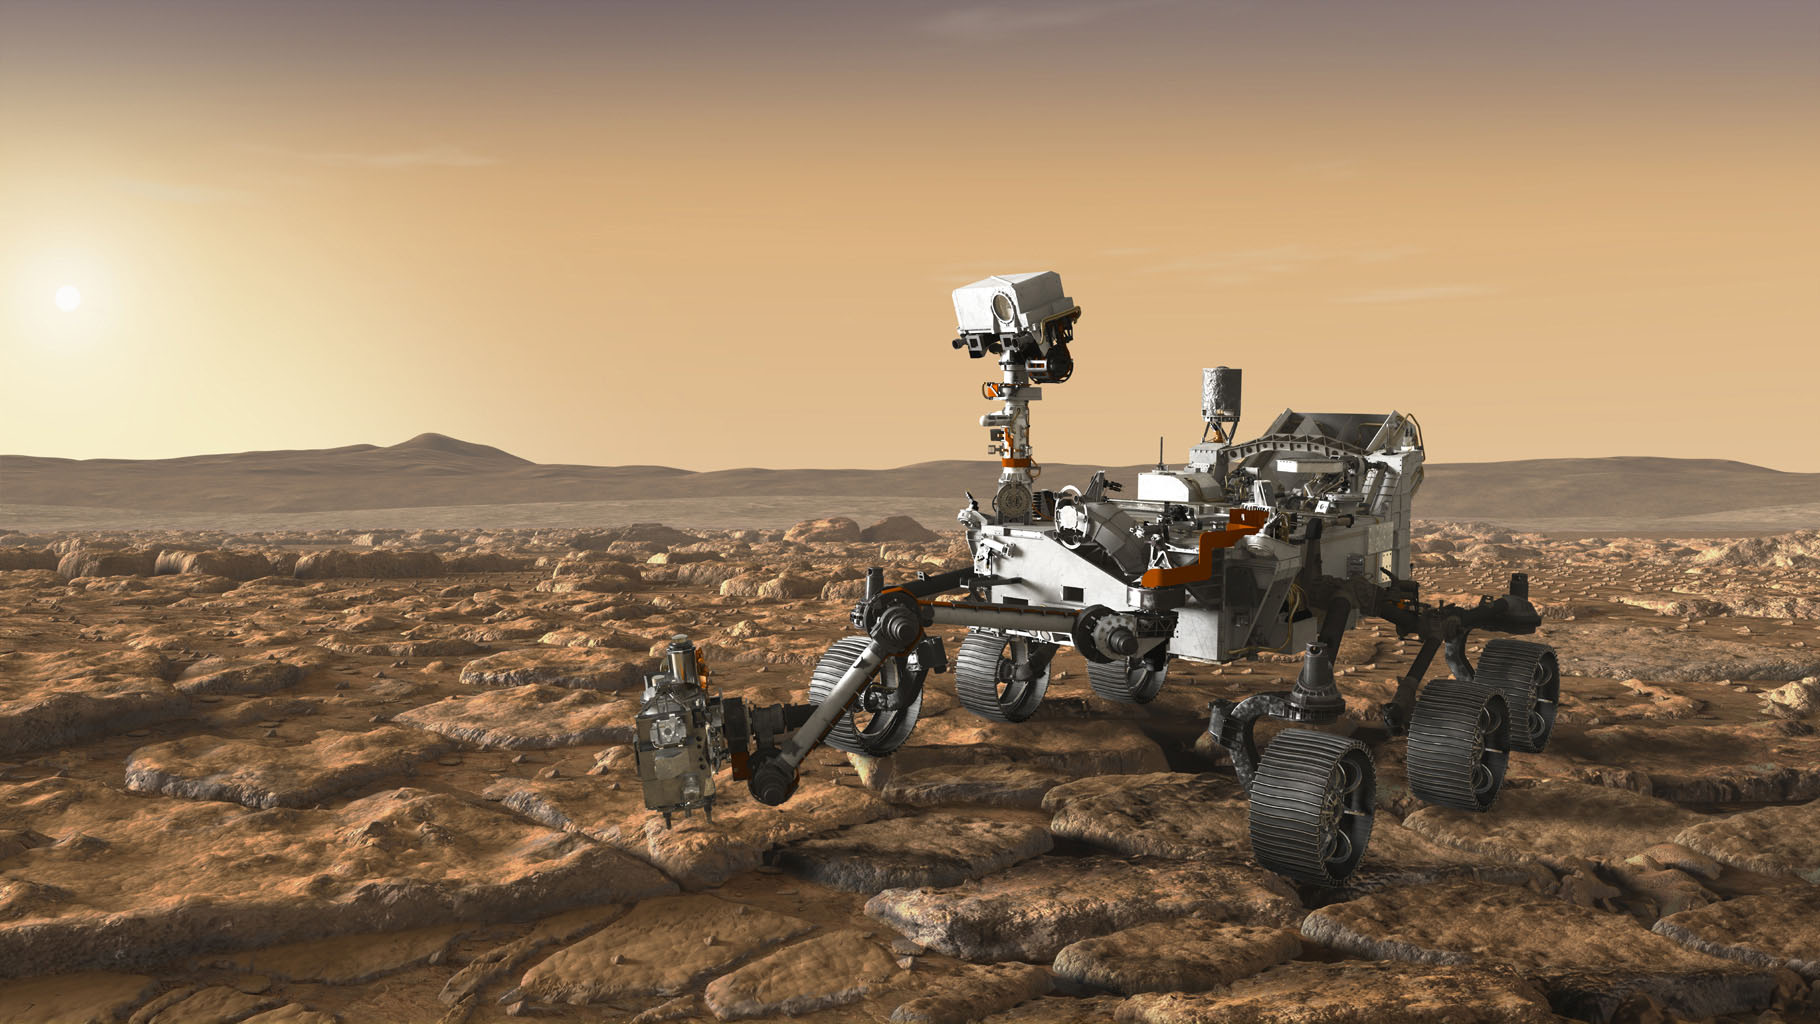 Humanity Is Sending 3 New Rovers to Mars in 2020 to Look for Signs of Life